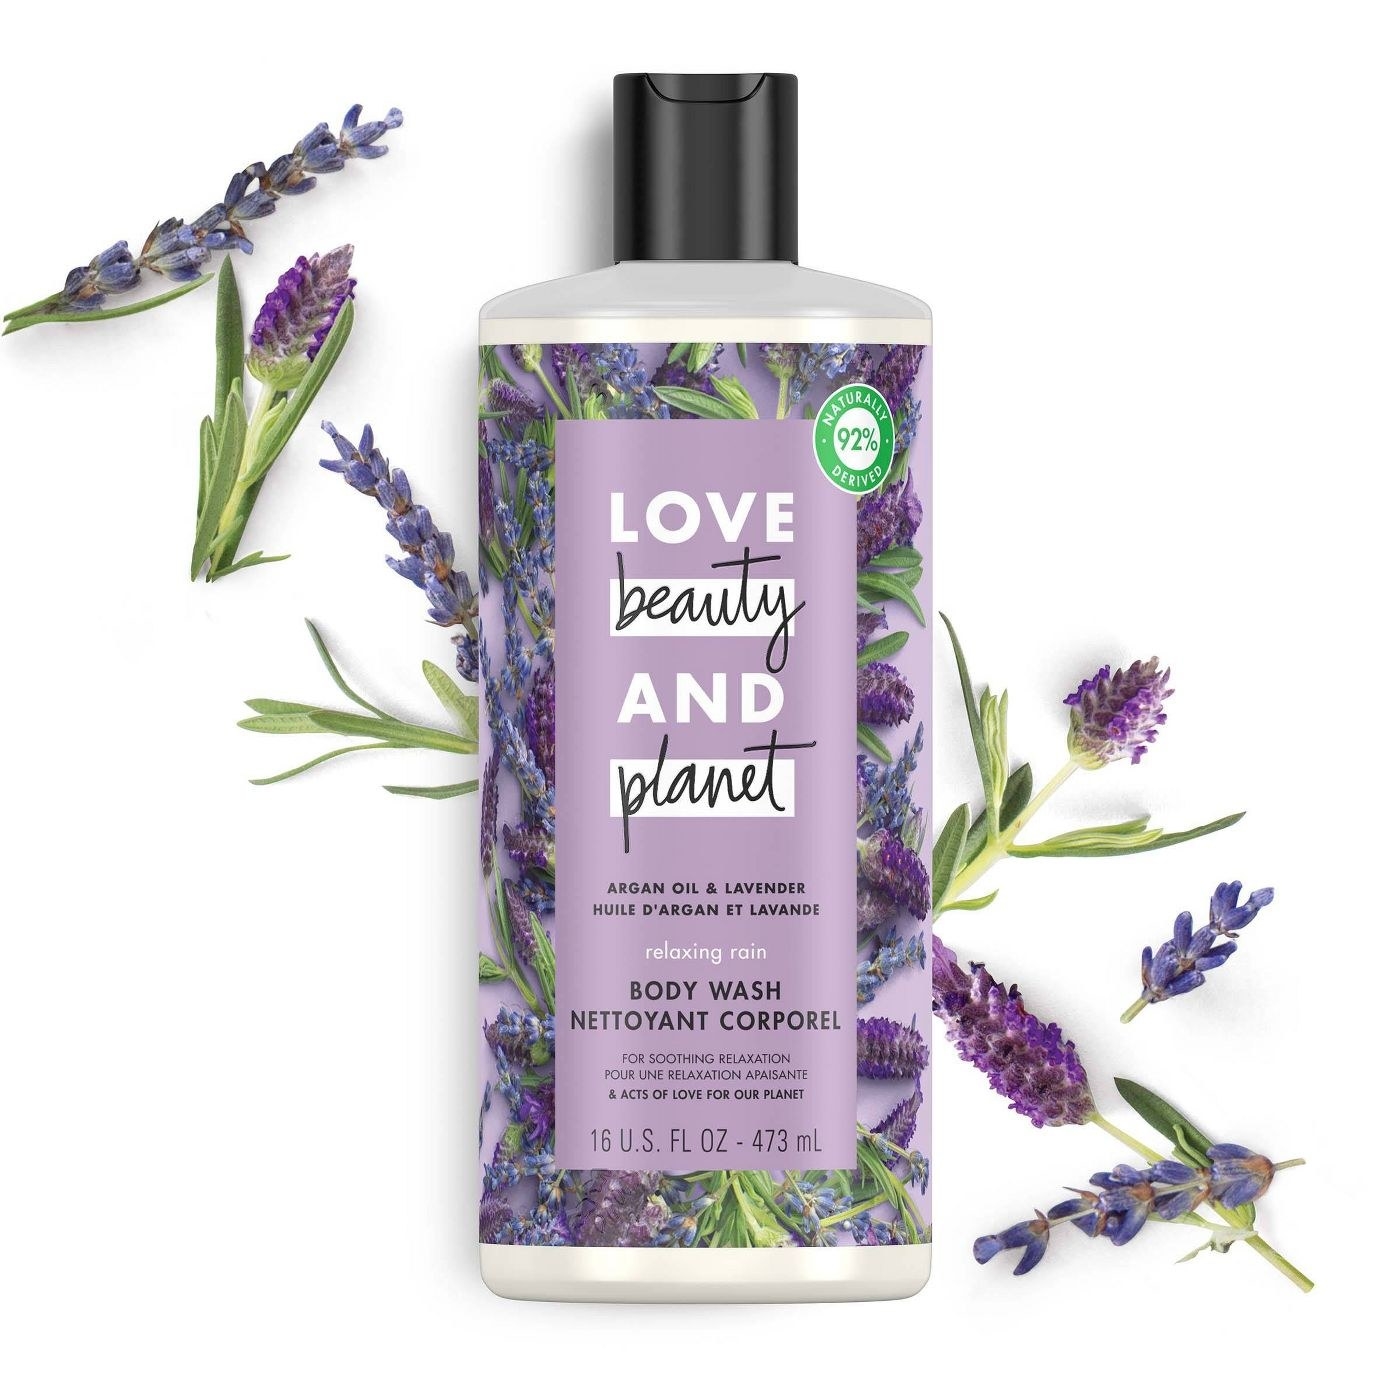 The Love Beauty &amp;amp; Planet argan oil &amp;amp; lavender relaxing body wash soap